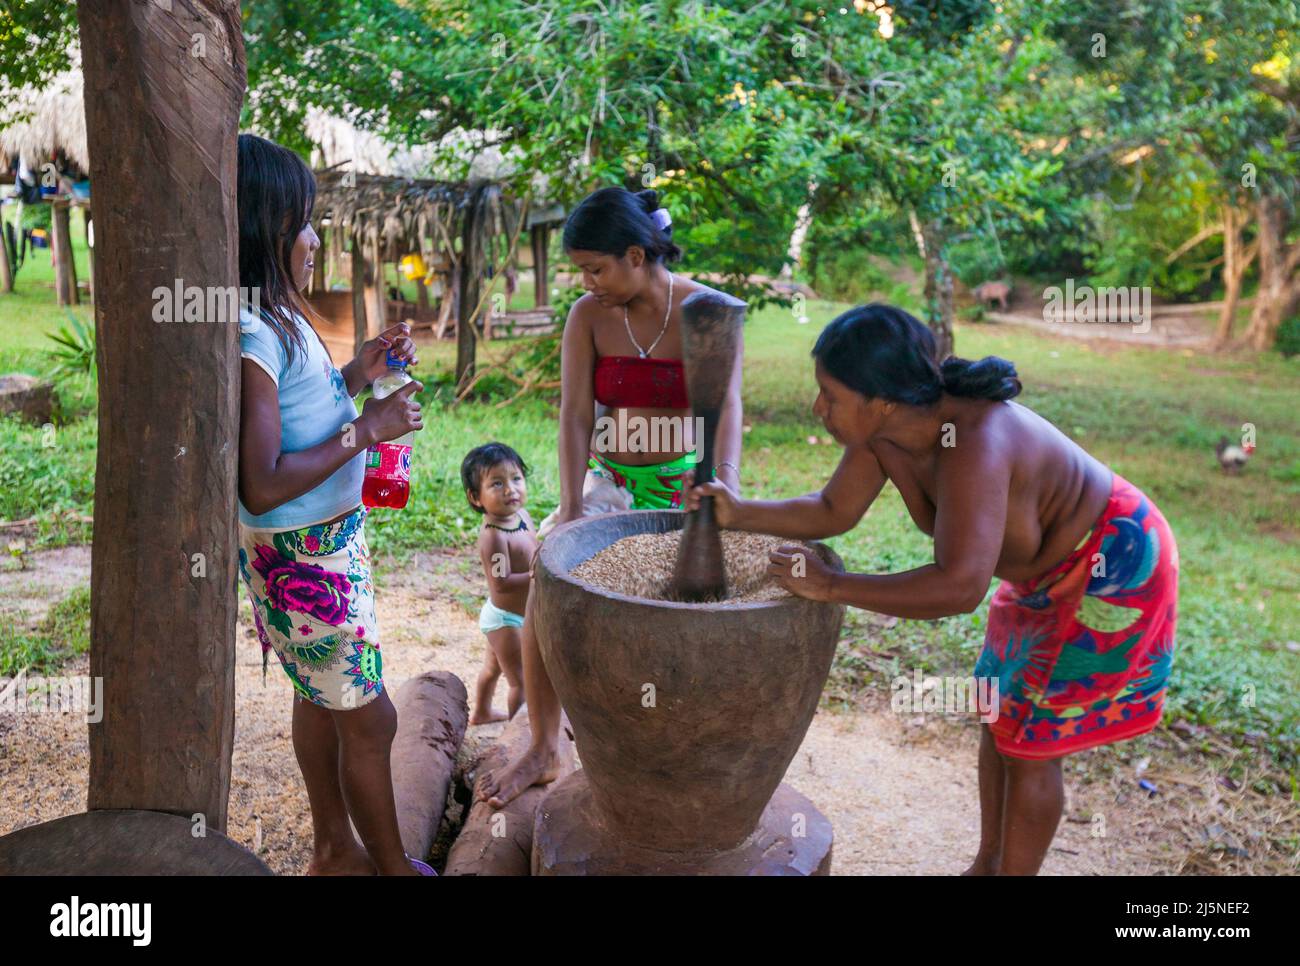 An Embera indian woman with her family is preparing rice harvest before cooking at Rio Mogue, Darien province, Republic of Panama, Central America Stock Photo